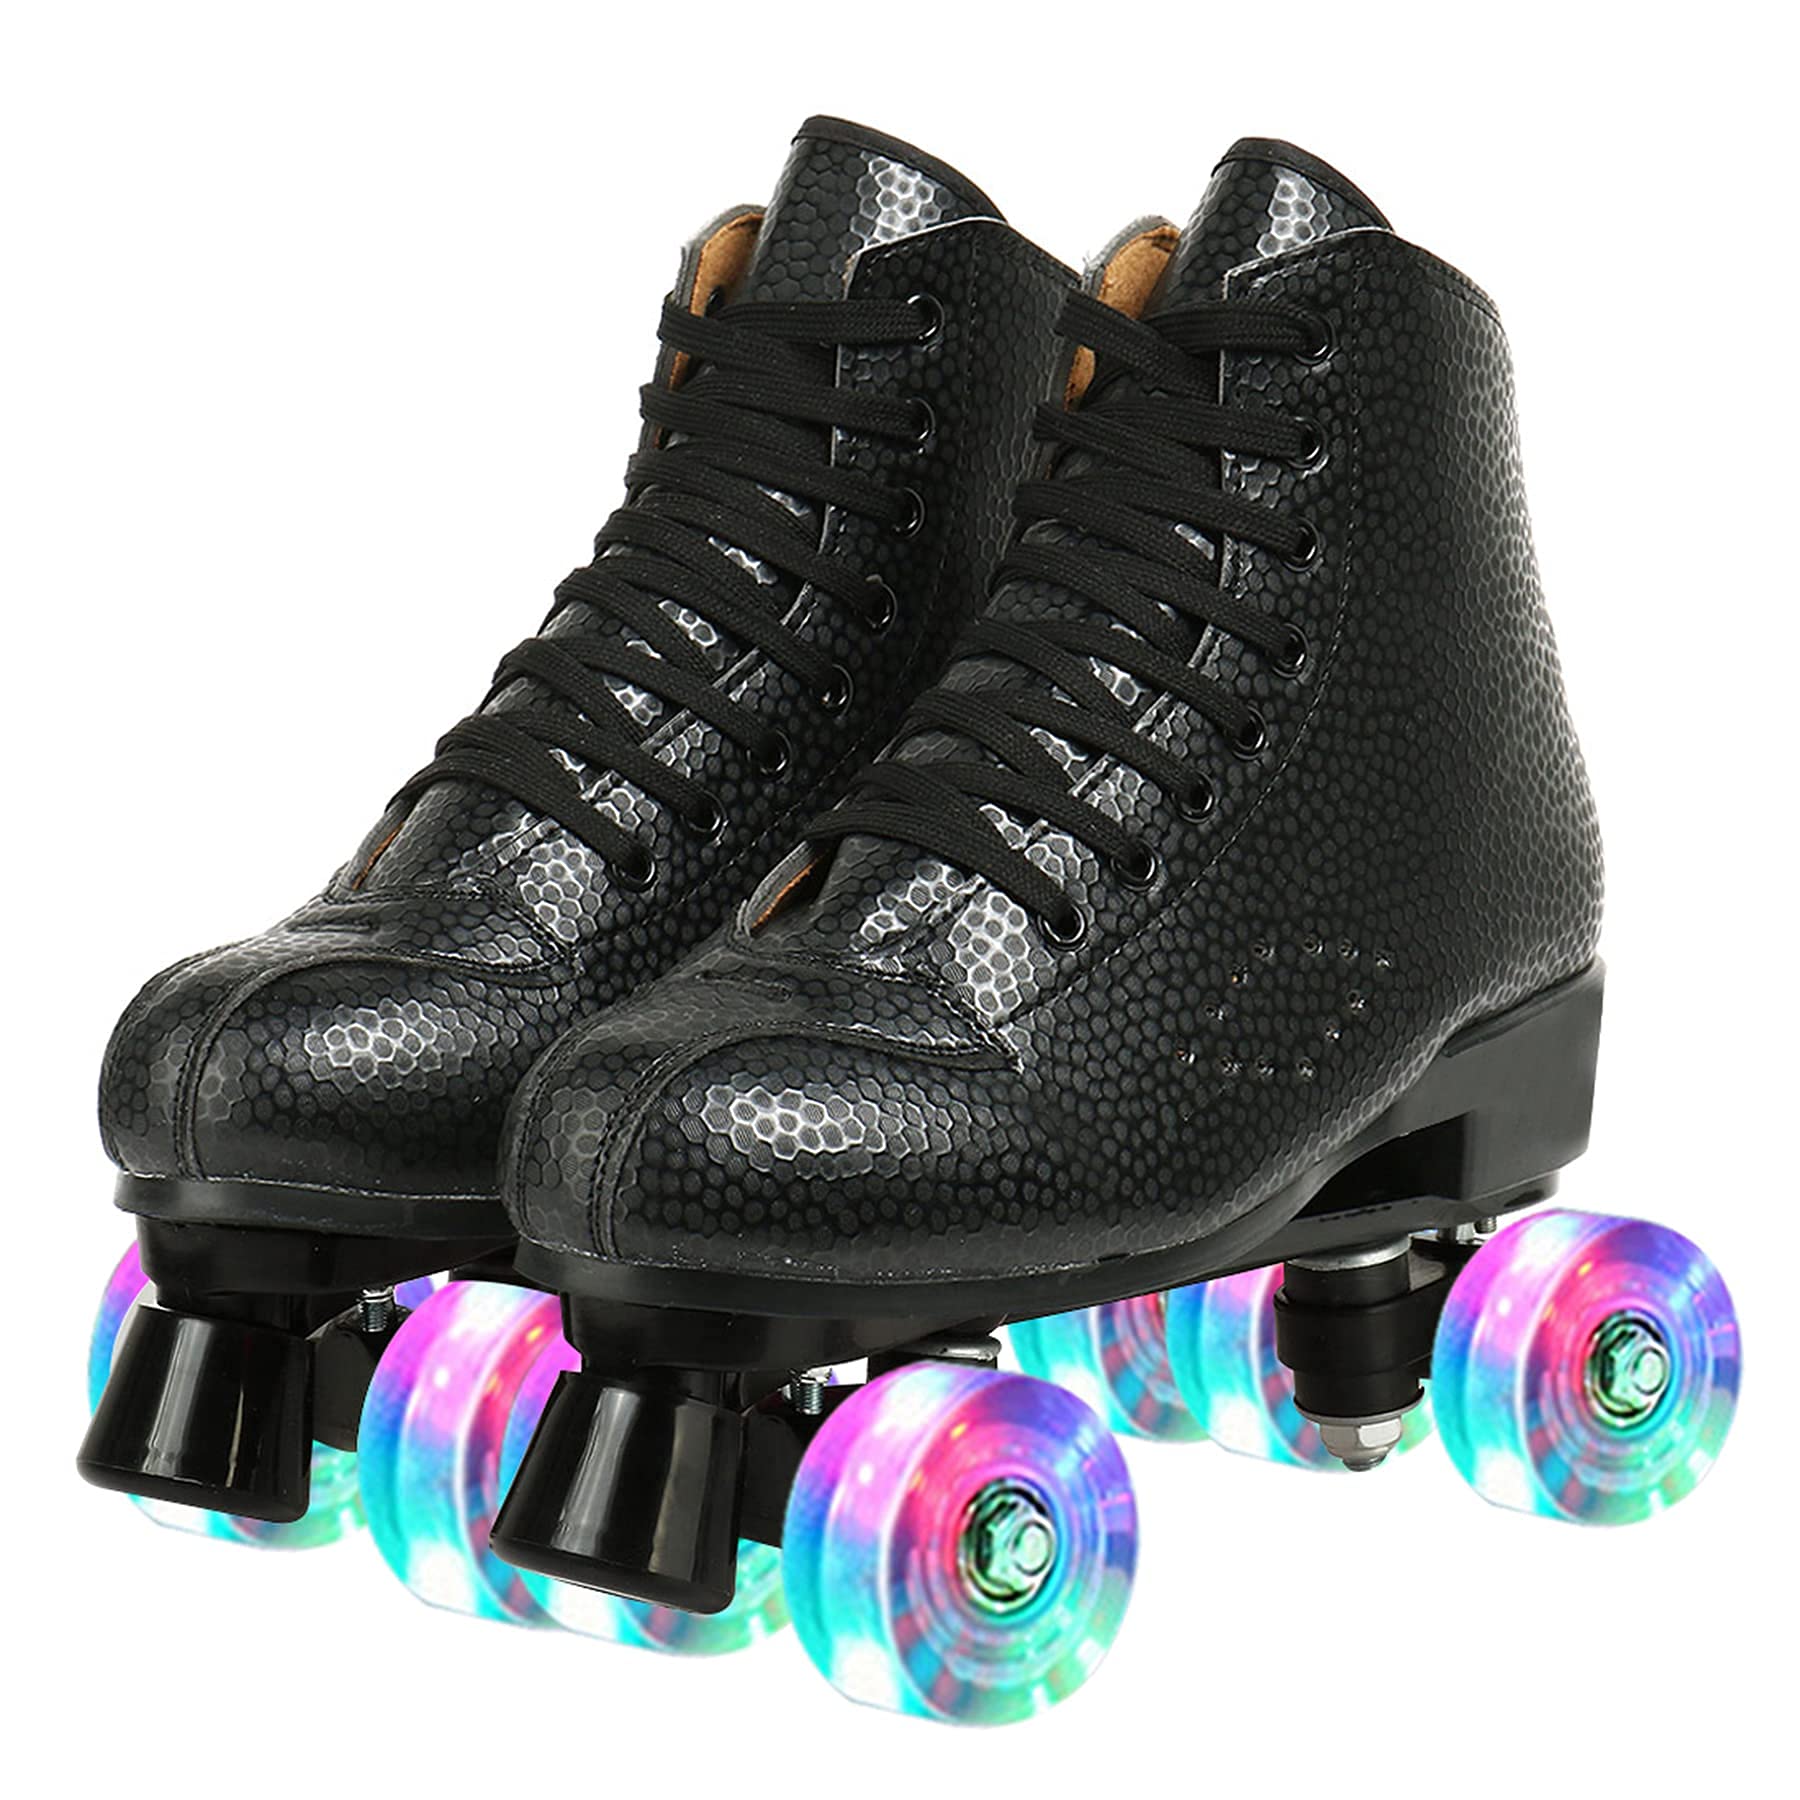 Unisex Roller Skates Double Row Four Shiny Wheels Rubber and PU Leather Classic High-top Roller Skates Shoes for Indoor and Outdoor